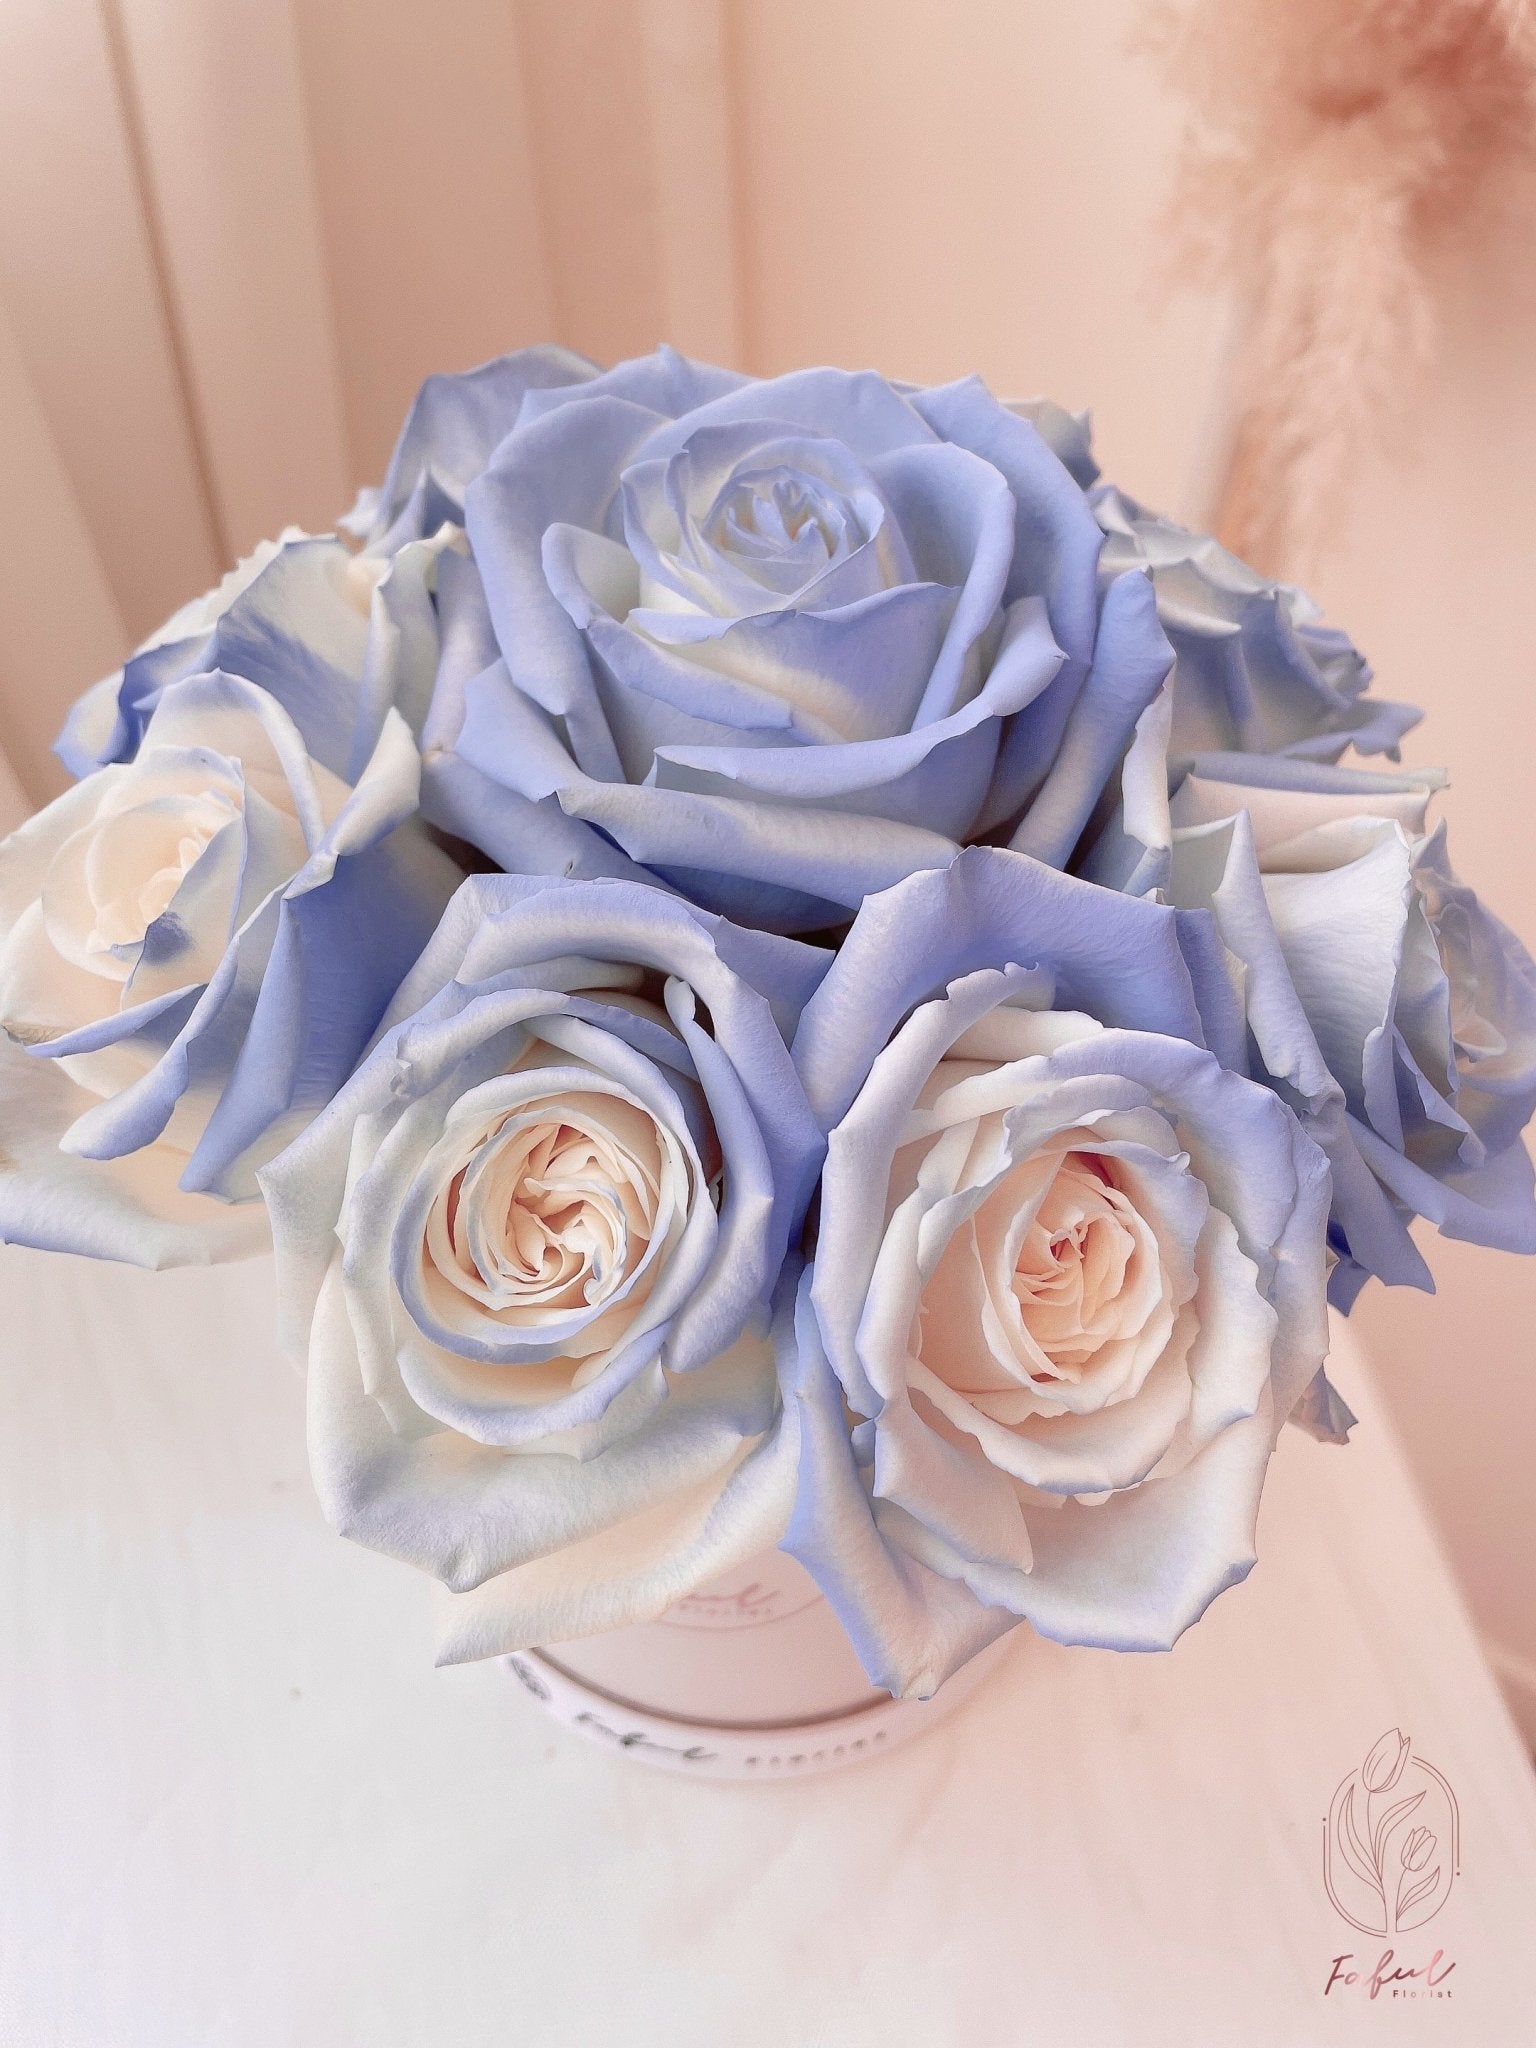  "Frozen Blue Rose Flowers" - A mesmerizing flower box featuring stunning blue roses, perfect flowers for flower delivery in Hong Kong.2